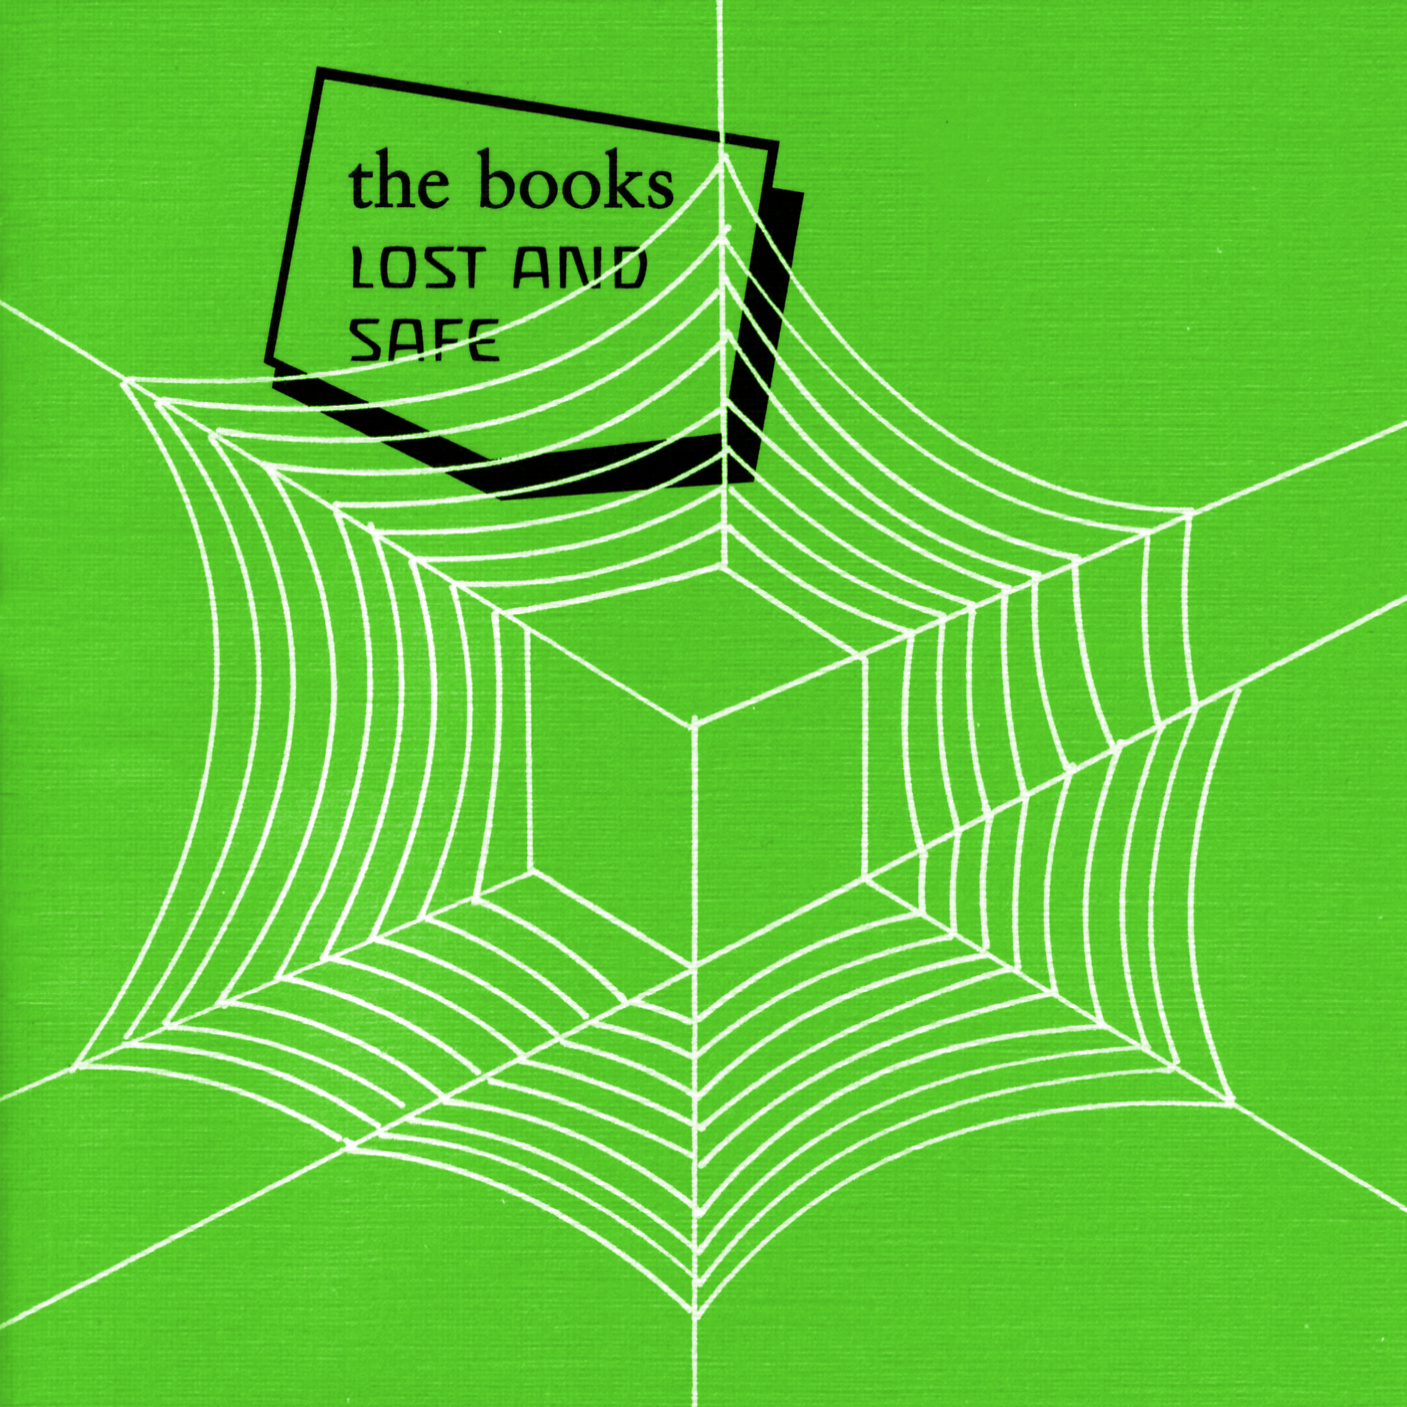 The Books: Lost and Safe cover art features an abstract cube at the center of a spider web